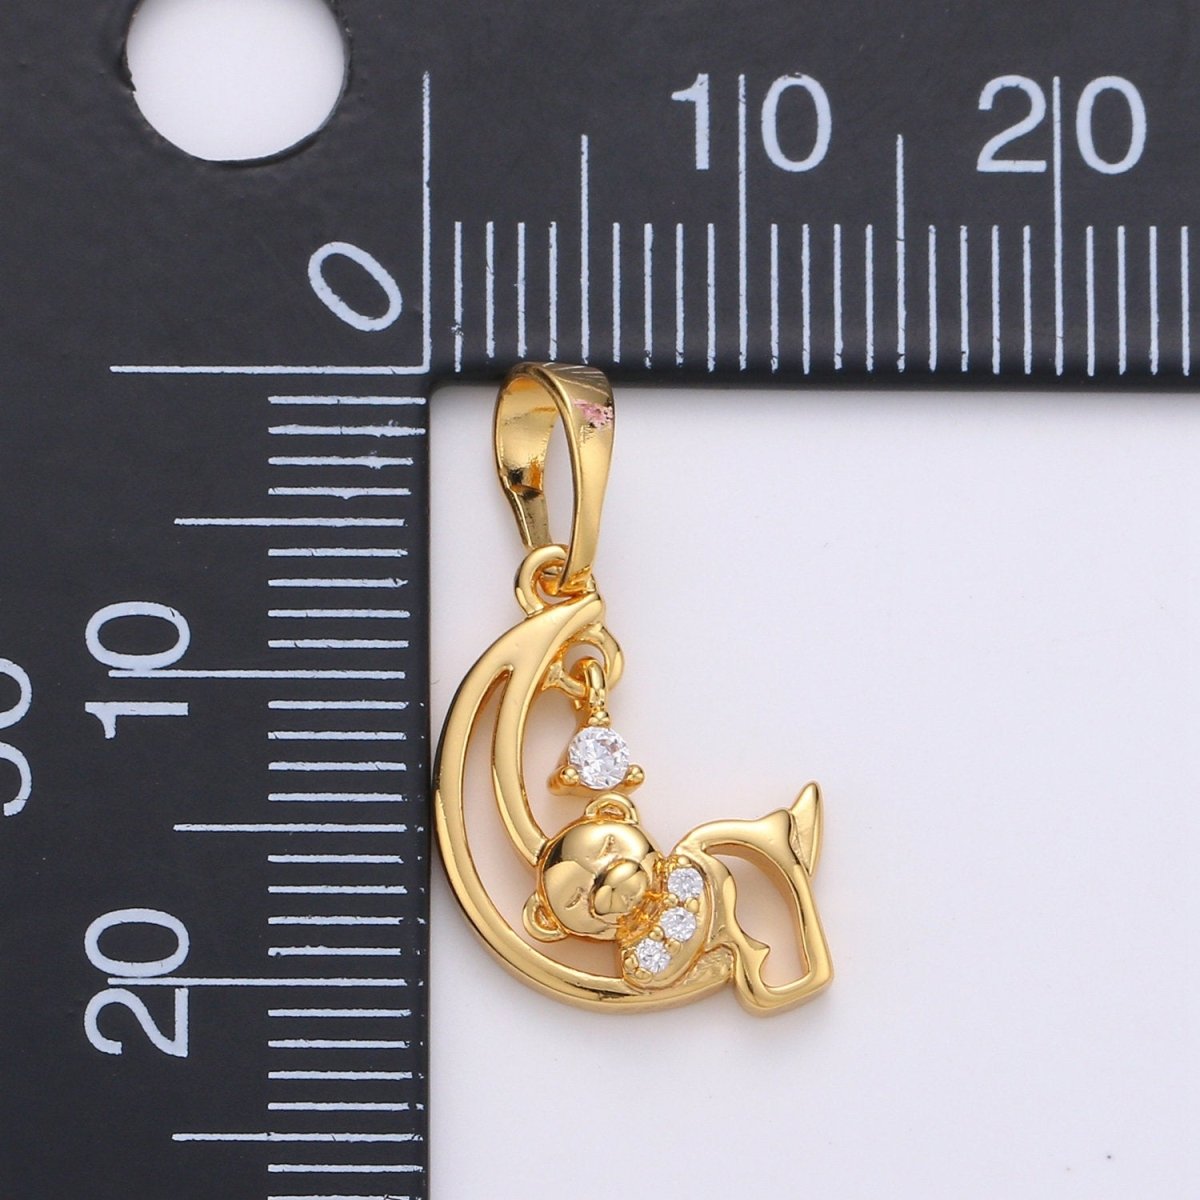 24k Gold Filled Charm Sleeping Teddy Bear On Crescent Moon with Cz Micro Pave Charms for Kids Daughter Necklace Christmas Jewelry Gift IDea J-081 - DLUXCA